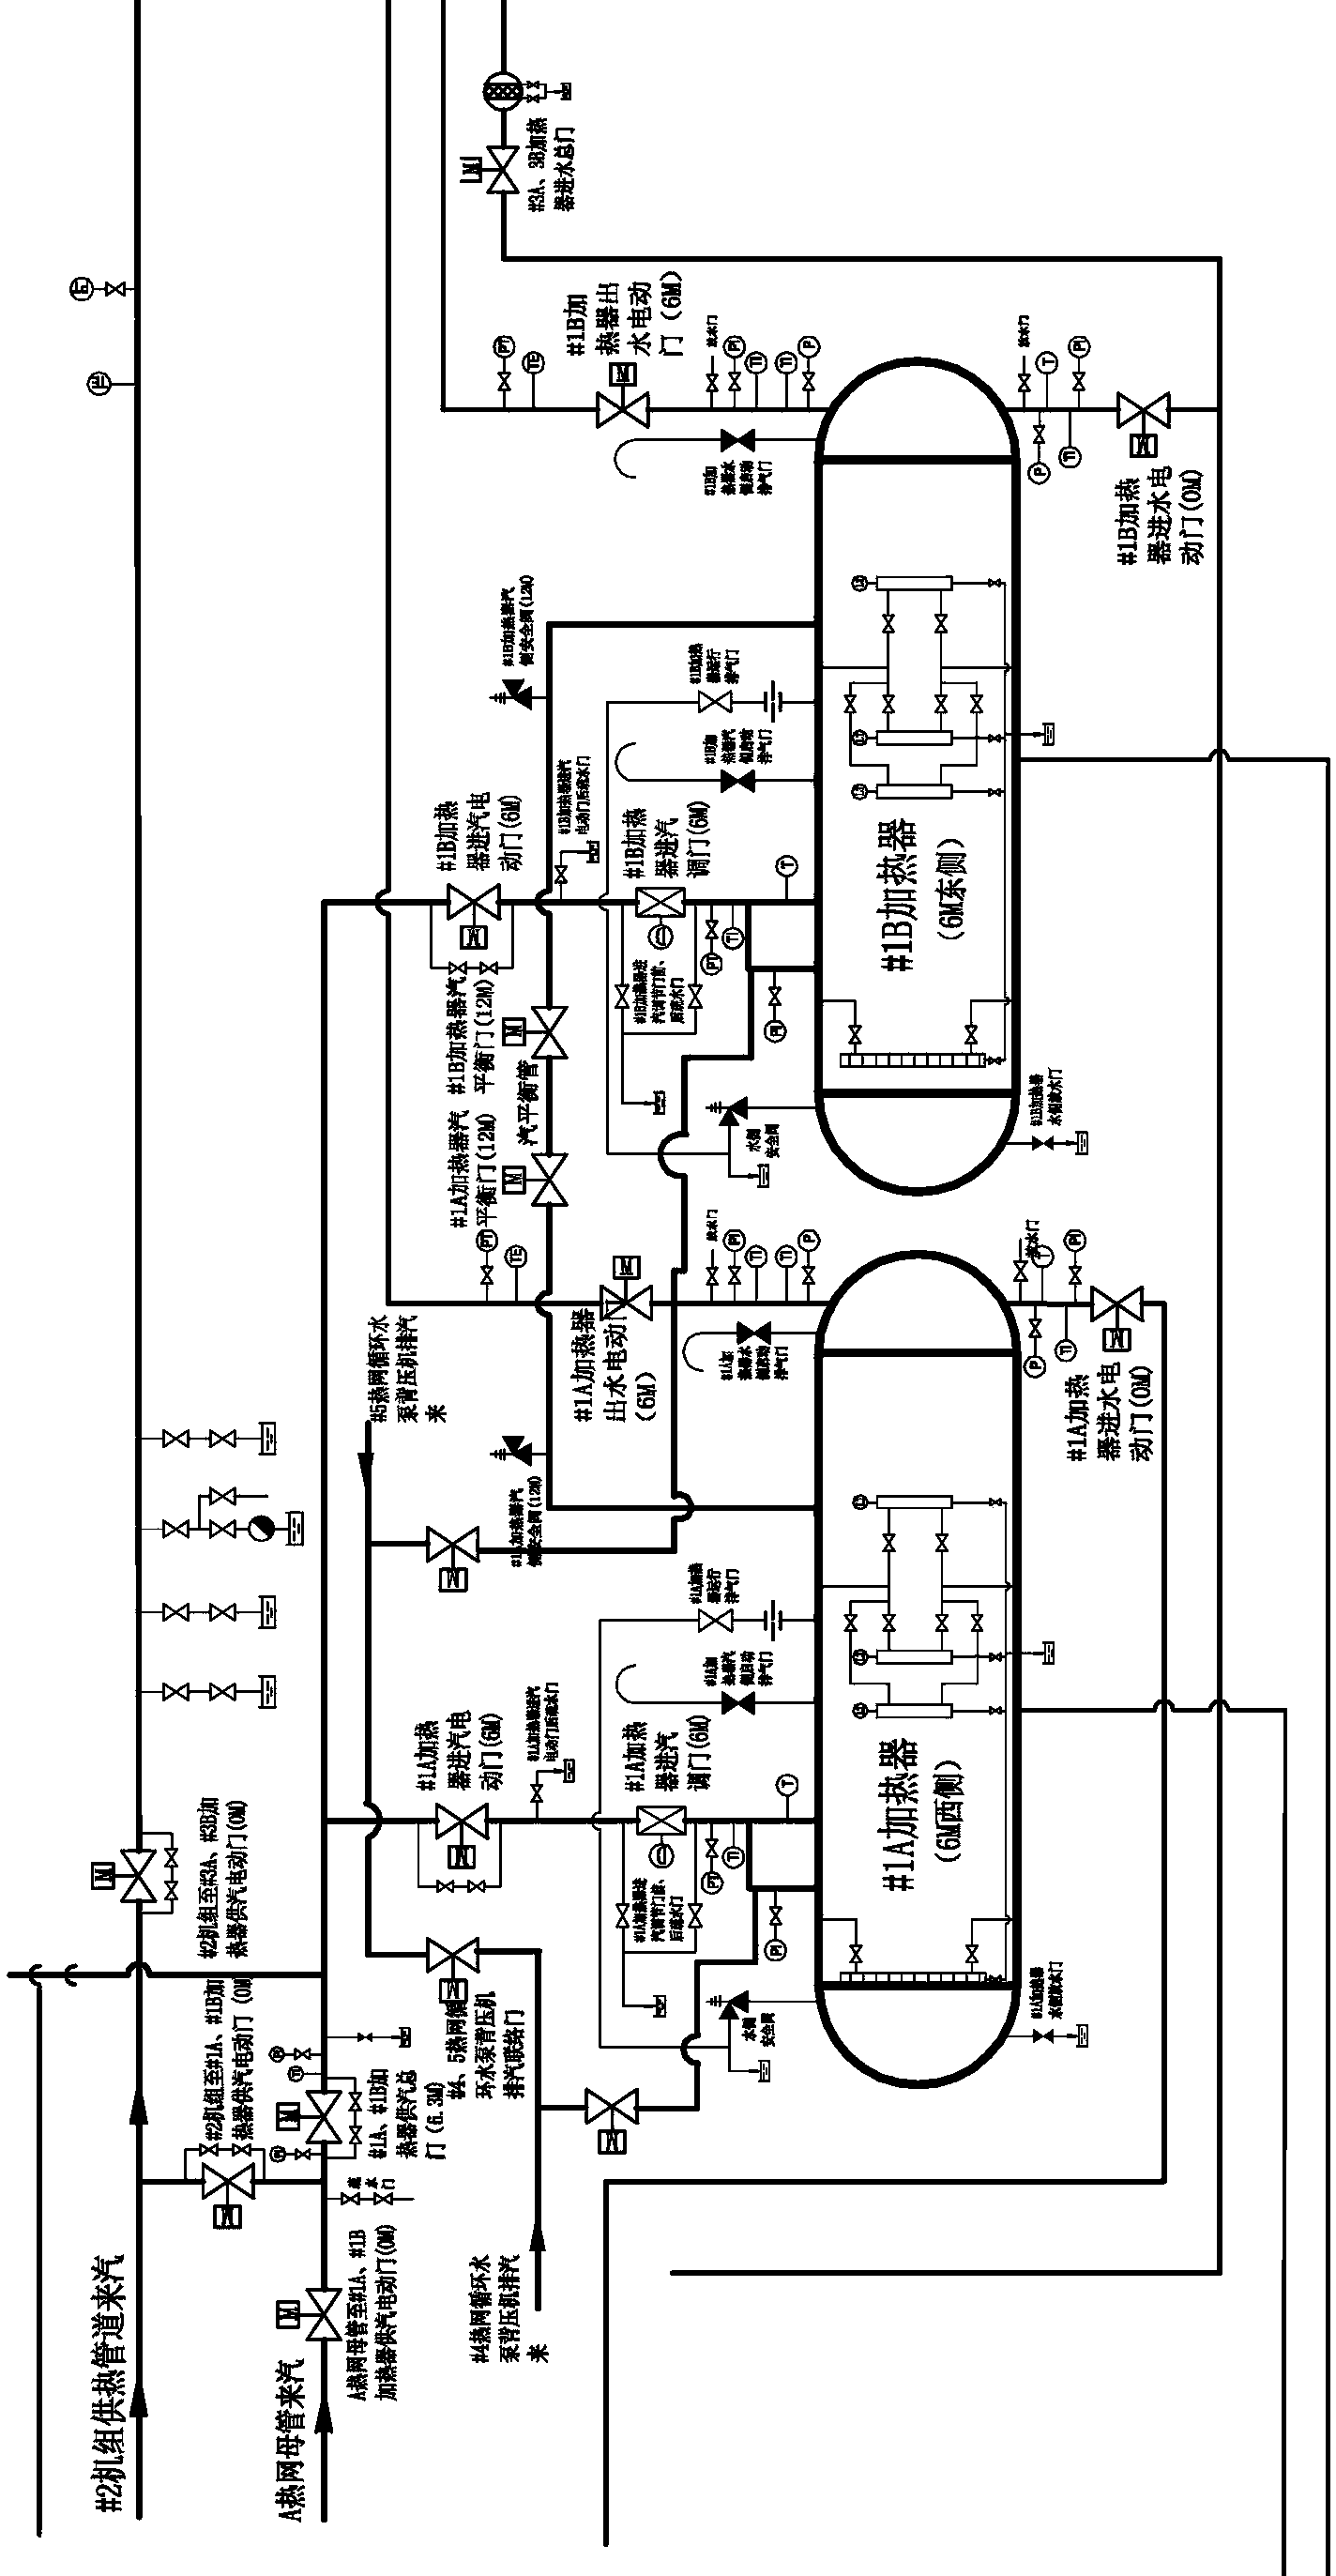 Redundant water draining system of high-back-pressure units of origin station of heat supply network